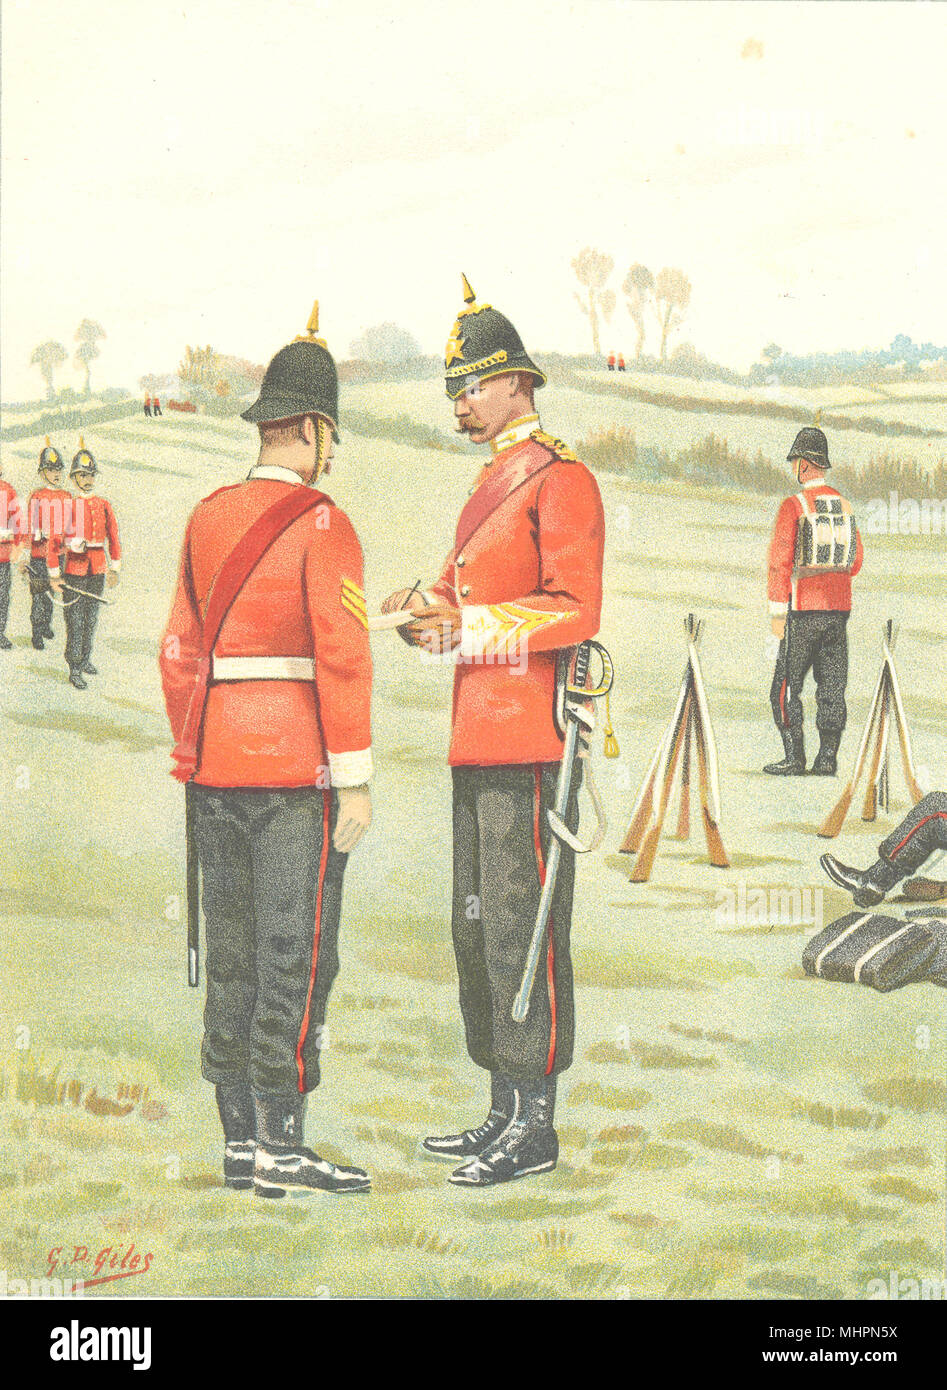 BRITISH ARMY UNIFORMS. The 43rd – Oxfordshire Light Infantry Regiment 1890 Stock Photo